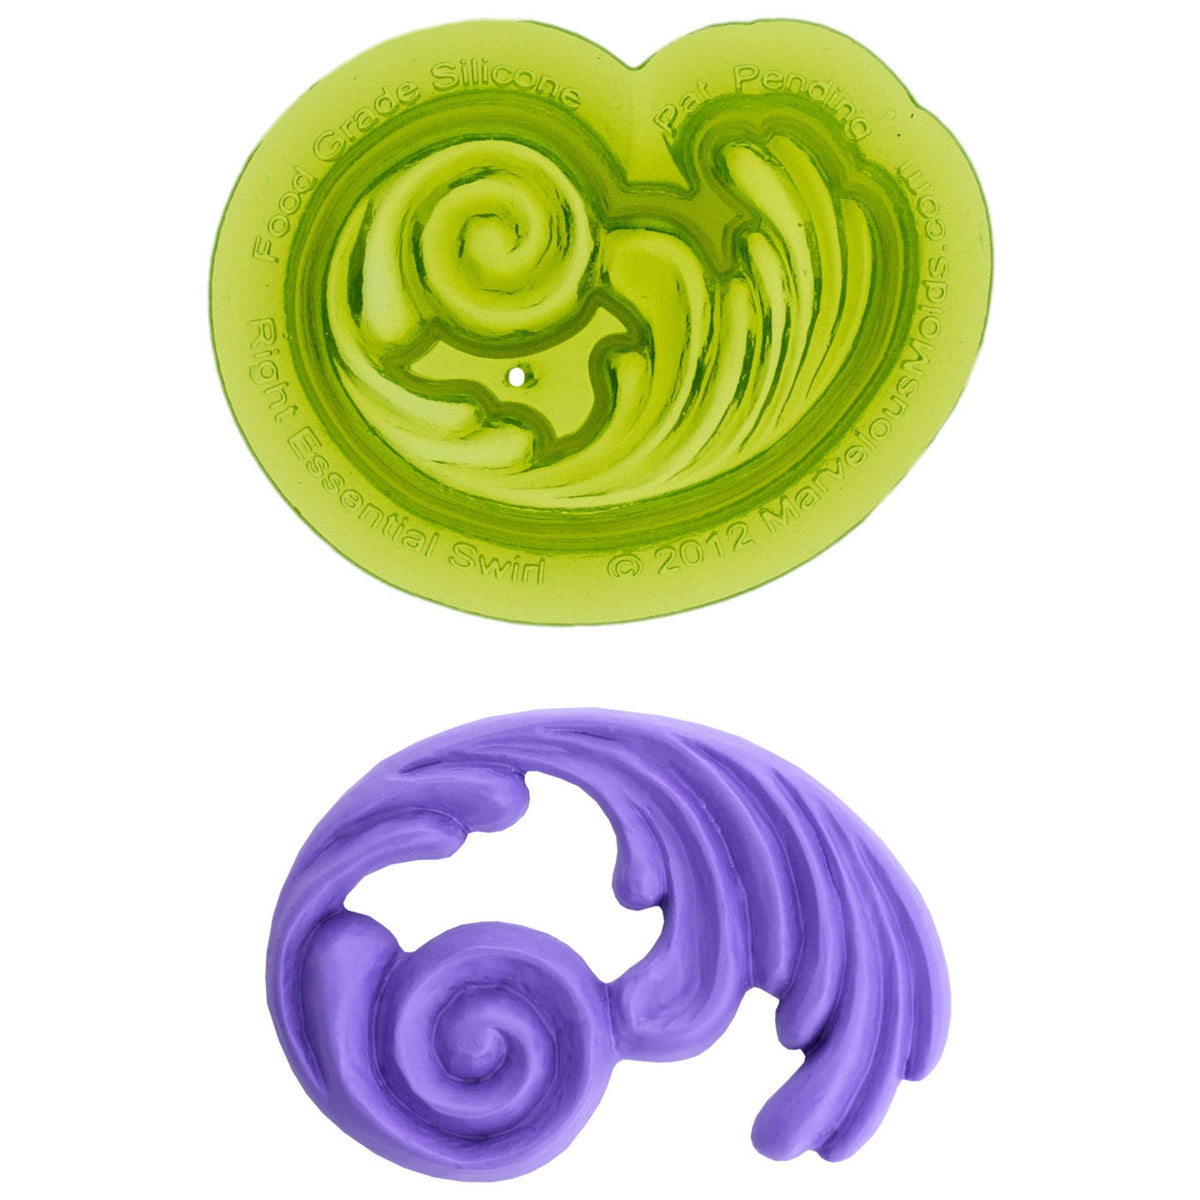 Essential Swirl Right Food Safe Silicone Mold for Fondant Cake Decorating by Marvelous Molds